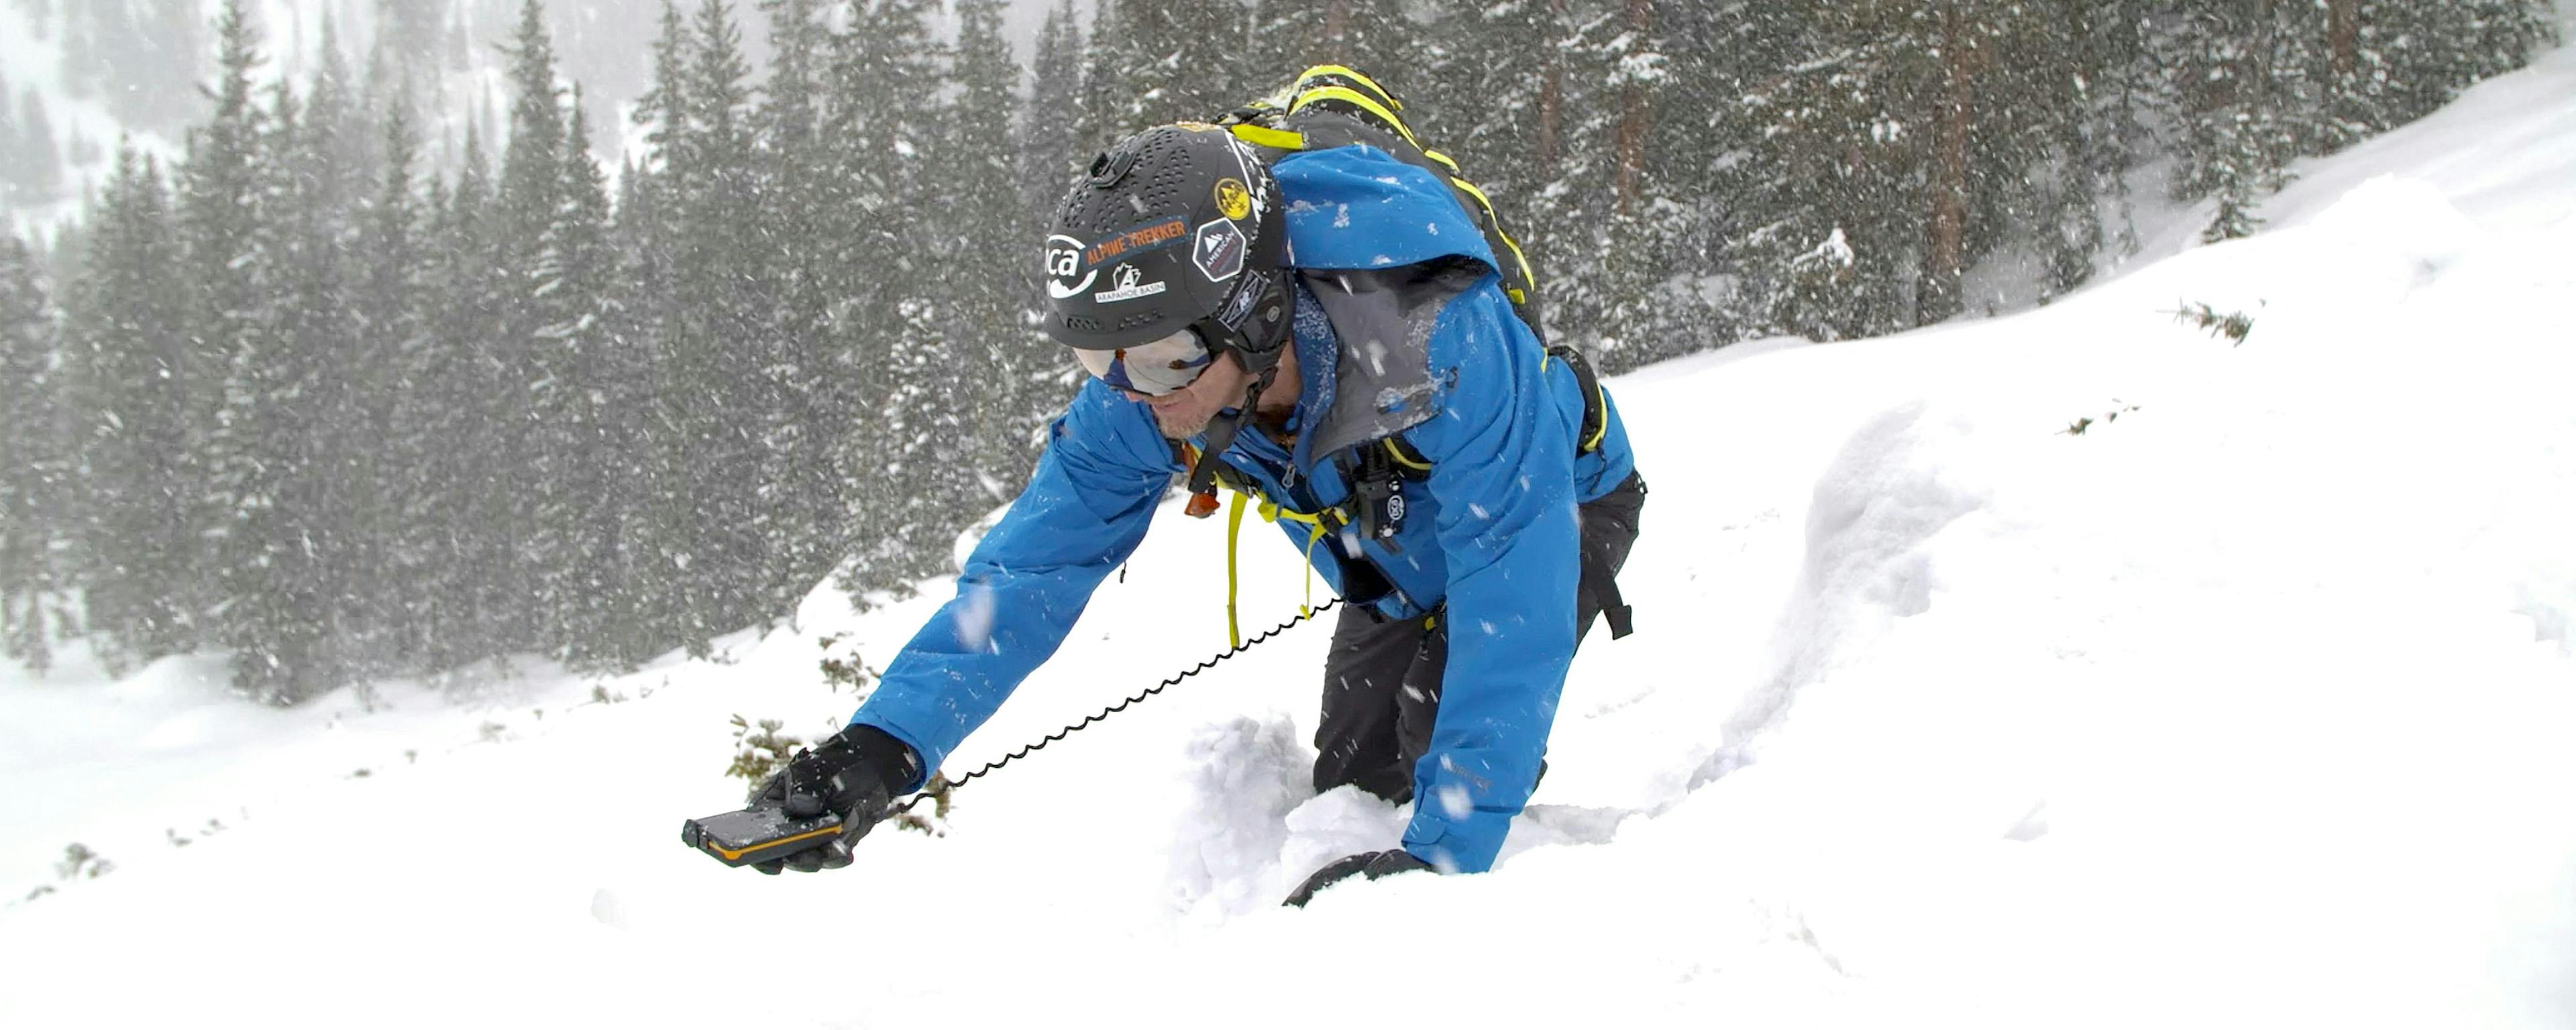 Avalanche safety gear and training